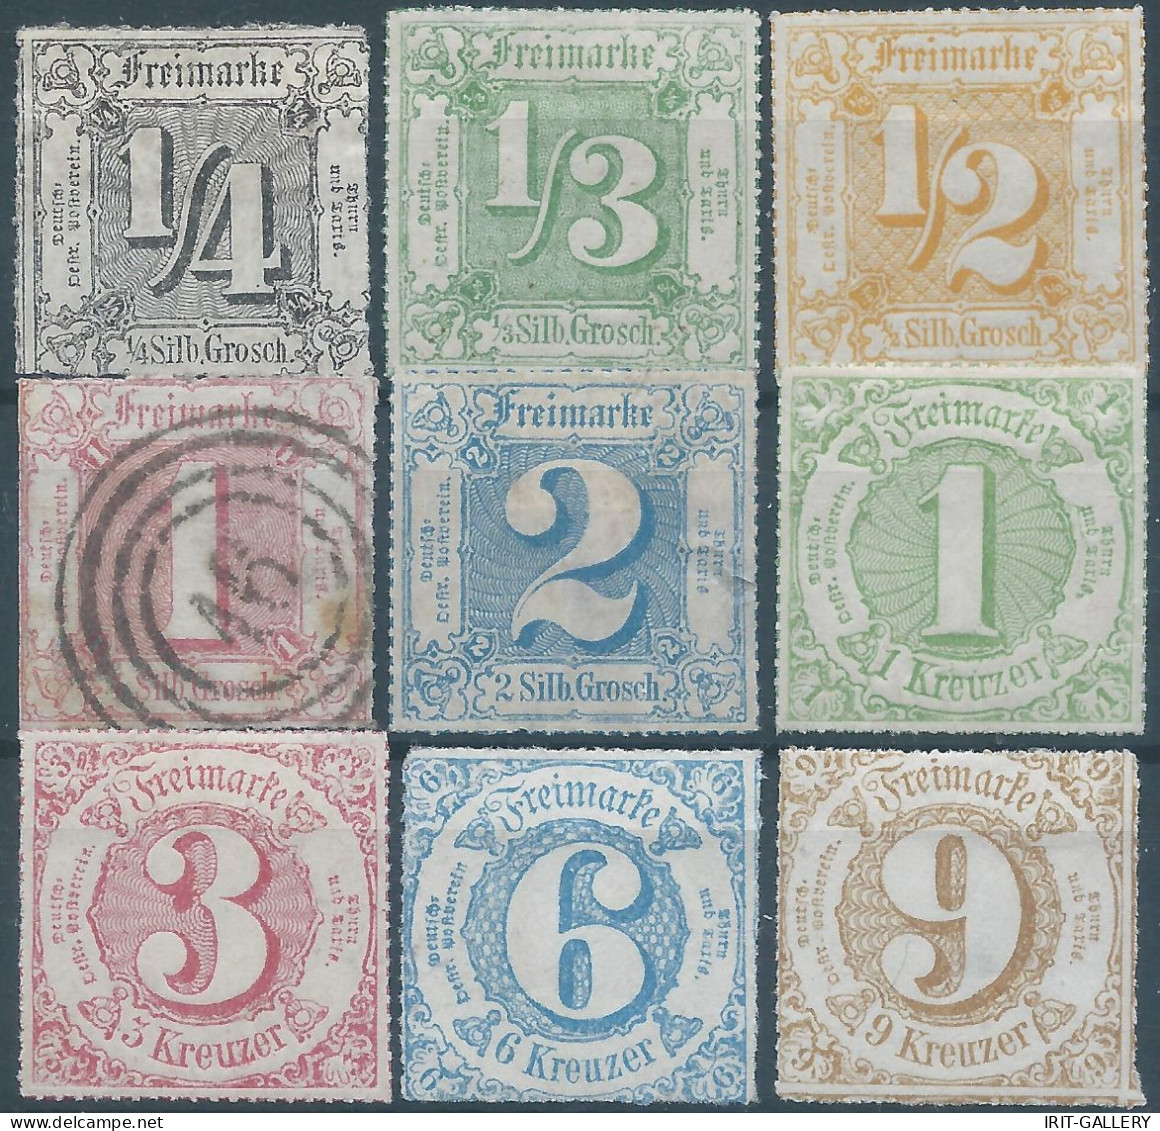 Germany-Deutschland,Thurn Und Taxis1865 Colored Print On White Paper-¼--½-1-2gr+1-3-6-9kr,Mint &1gr Used,Value:€130,00 - Mint